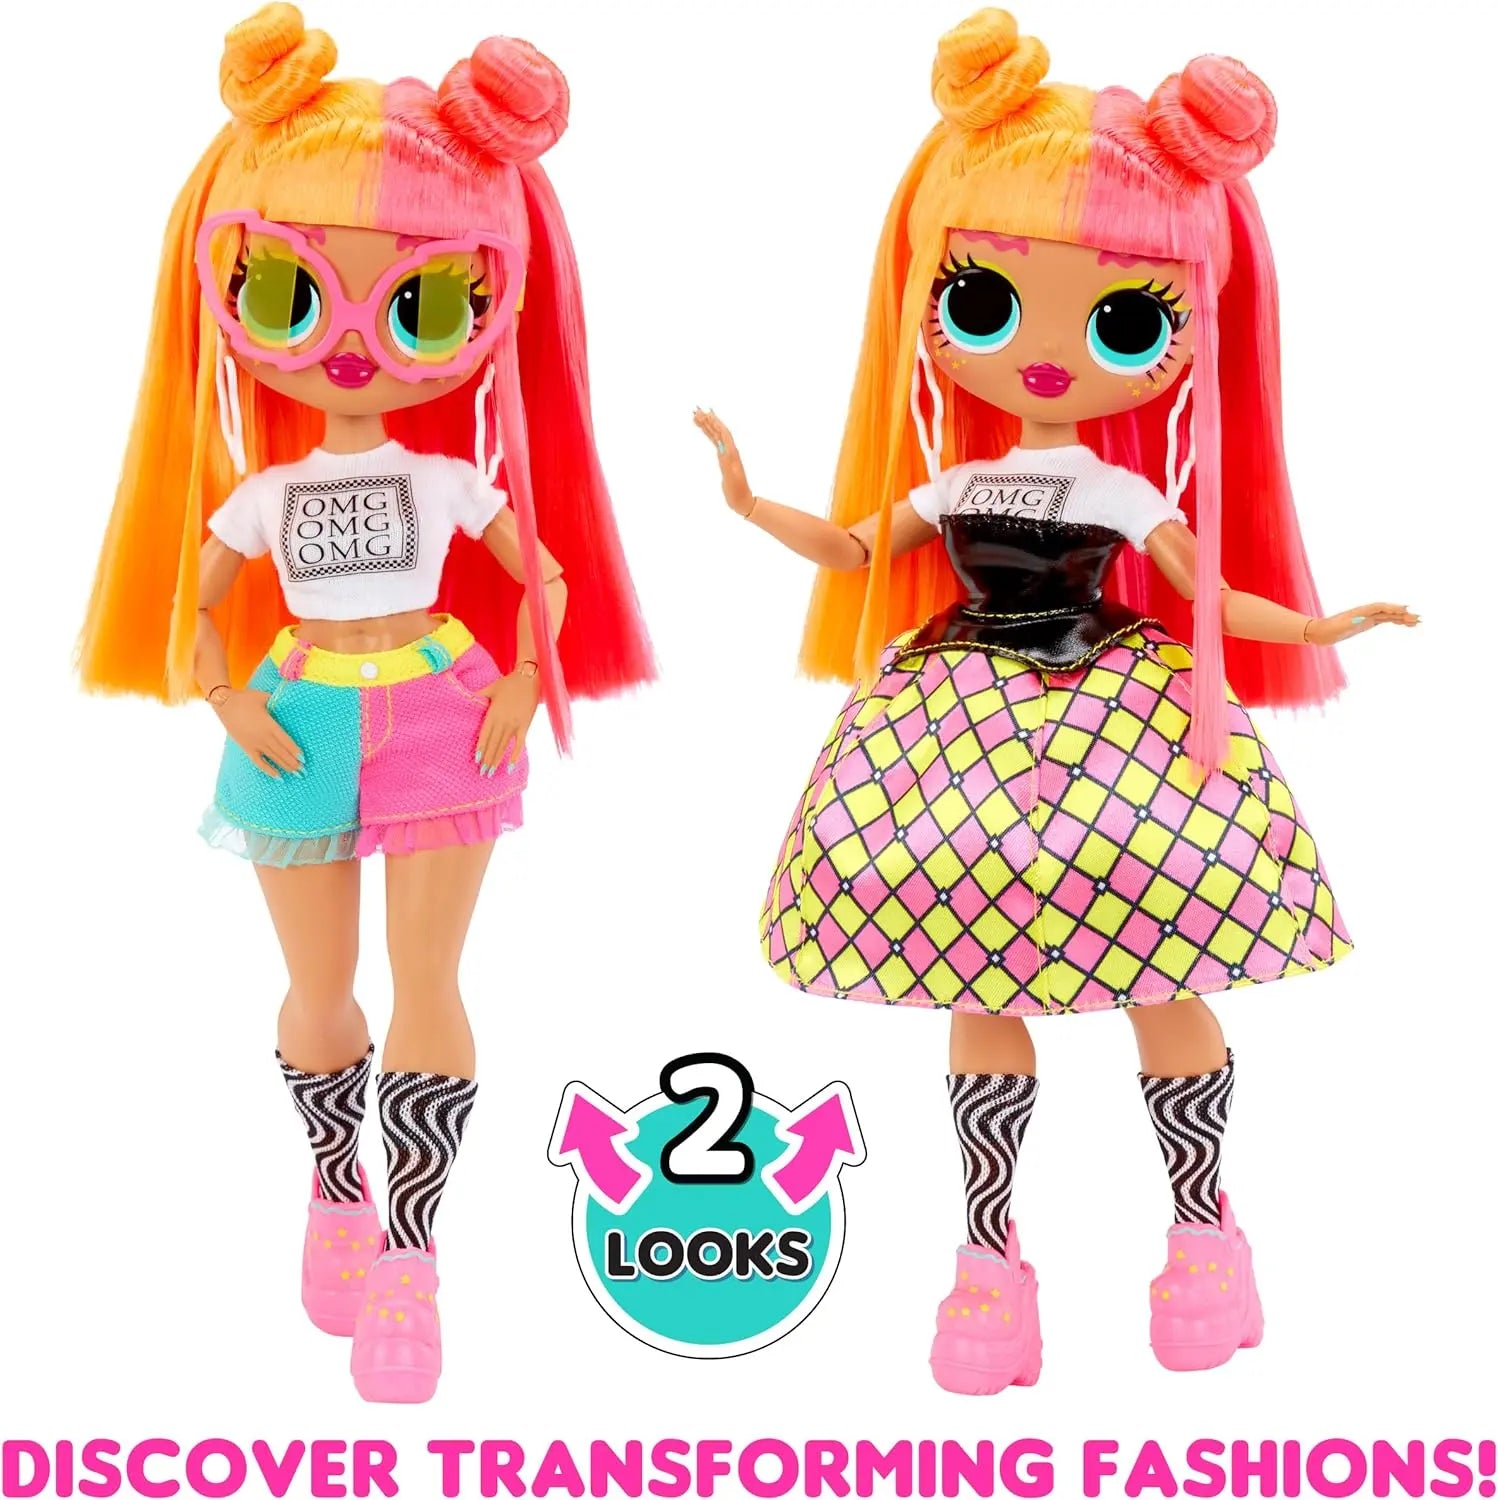 LOL Surprise OMG Neonlicious Fashion Doll LOL Surprise